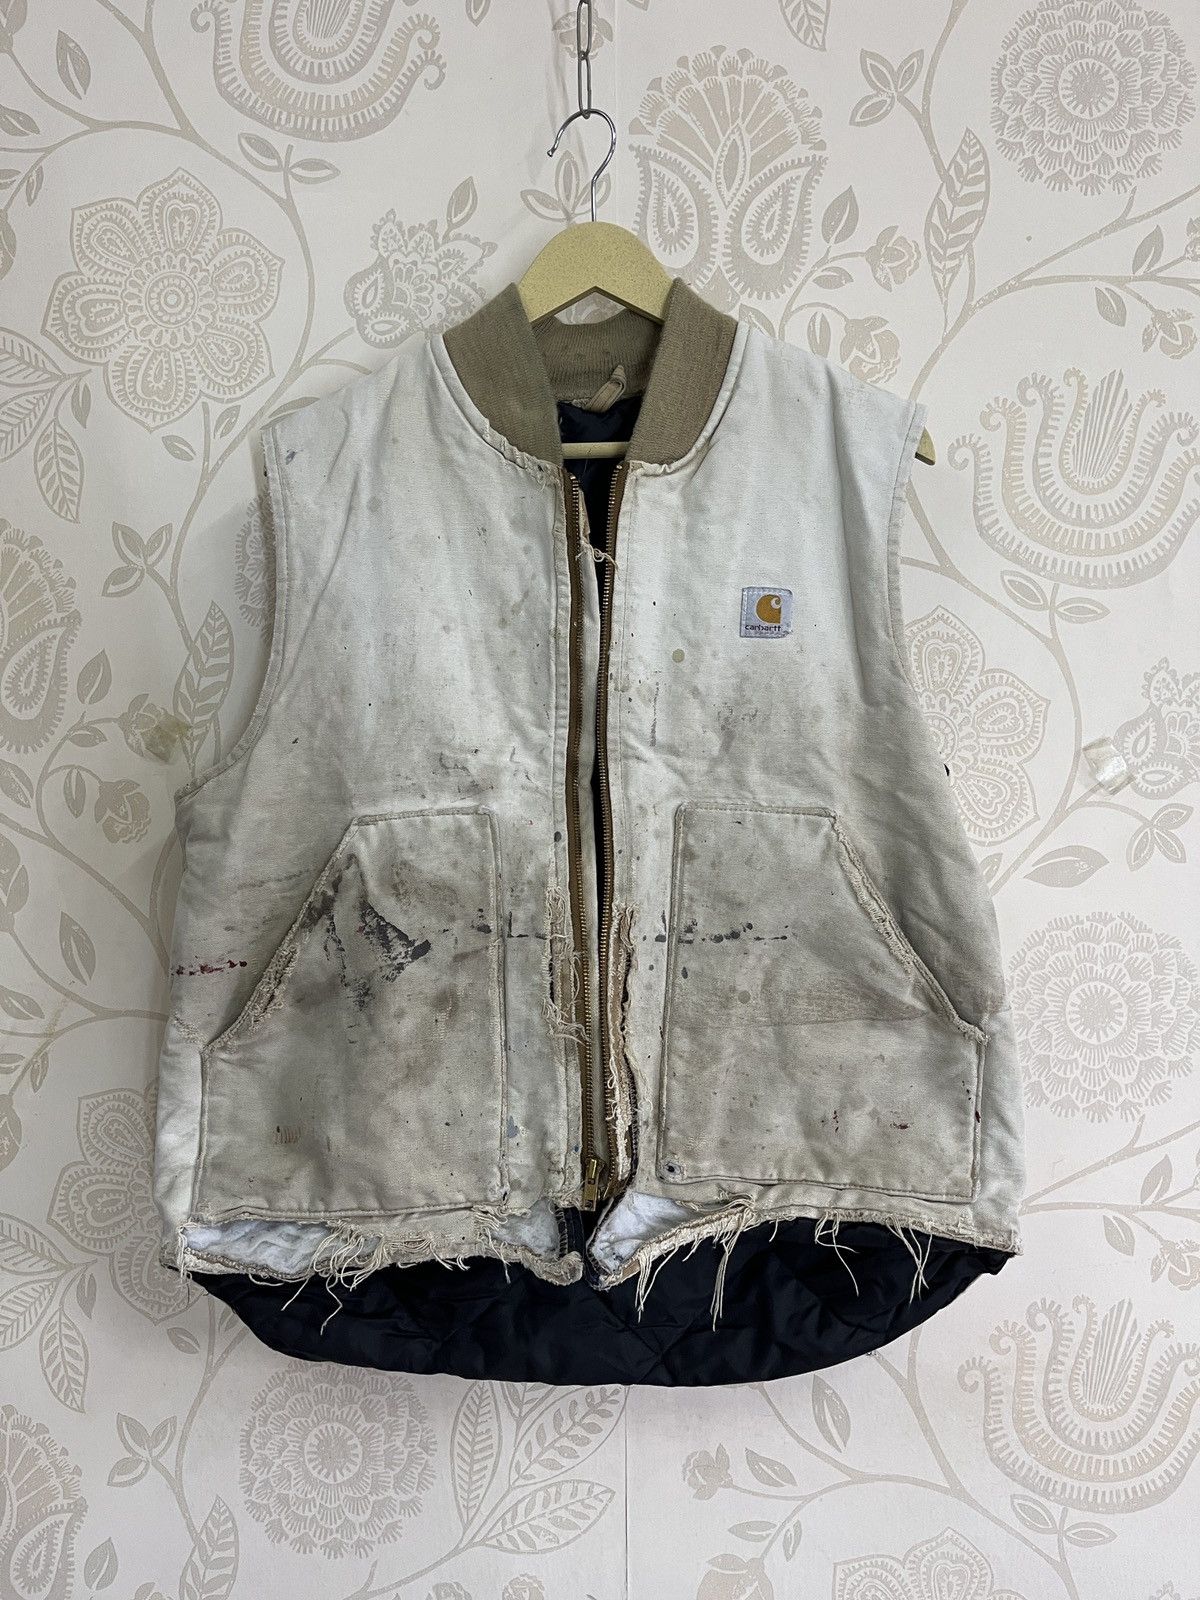 Distressed Vintage Carhartt Worker Vest Ripped Made In USA - 15